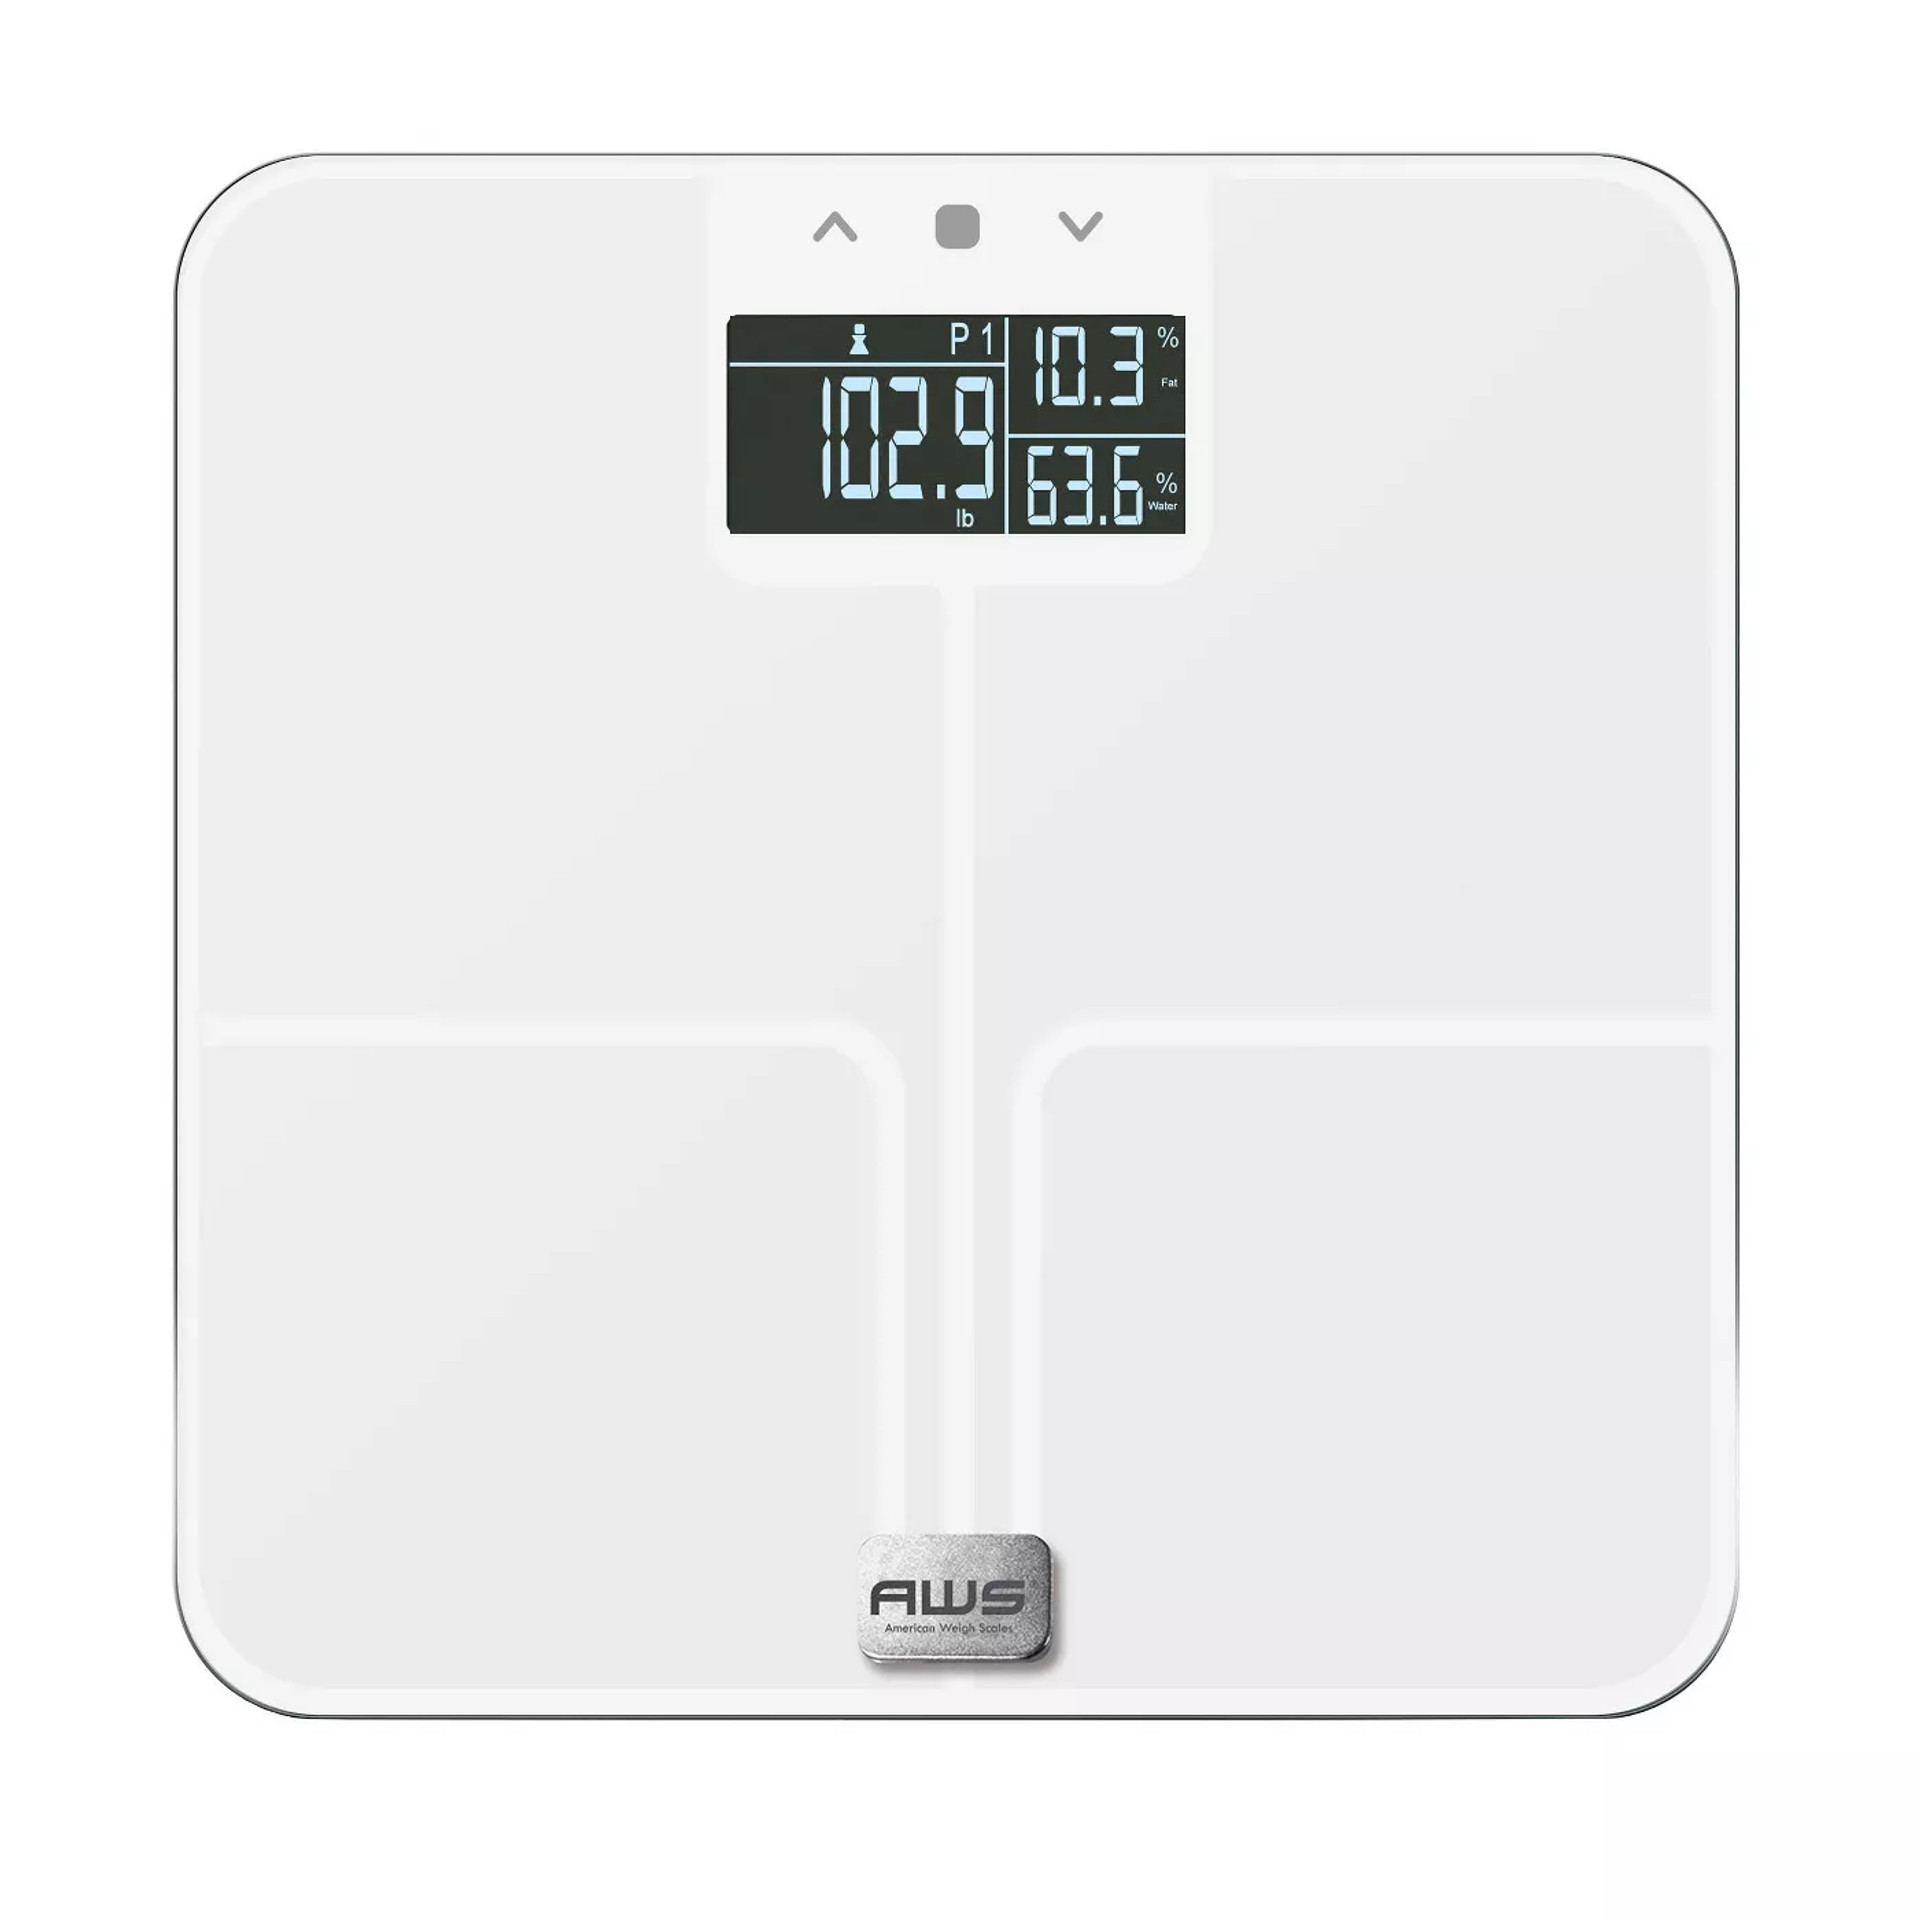 Buy American Weigh Scales DS-5KG, Peachtree 10lb Mechanical Kitchen Scale -  Mega Depot